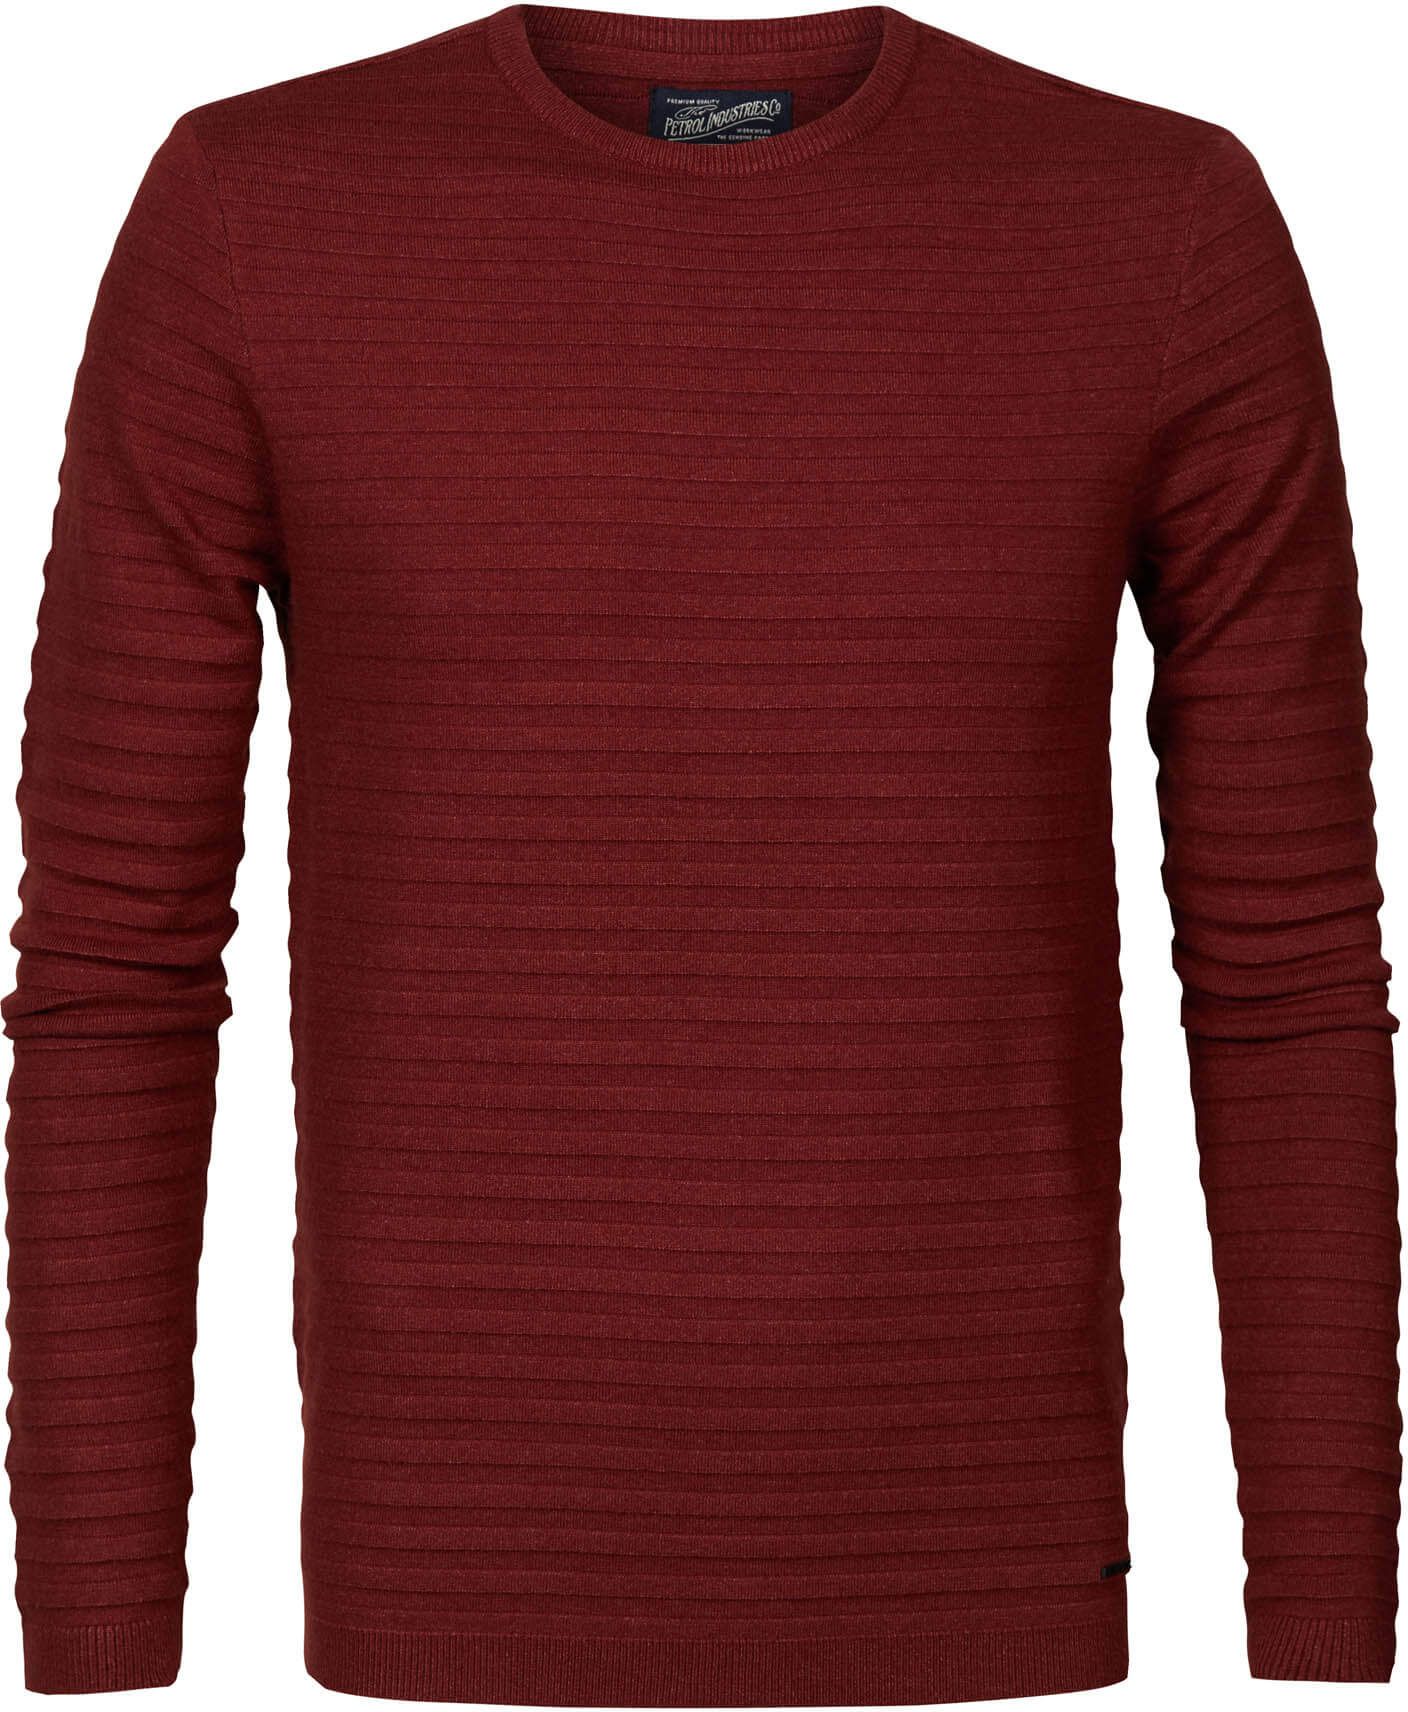 Petrol Sweater Knitted Rib Bordeaux Red Burgundy size XL